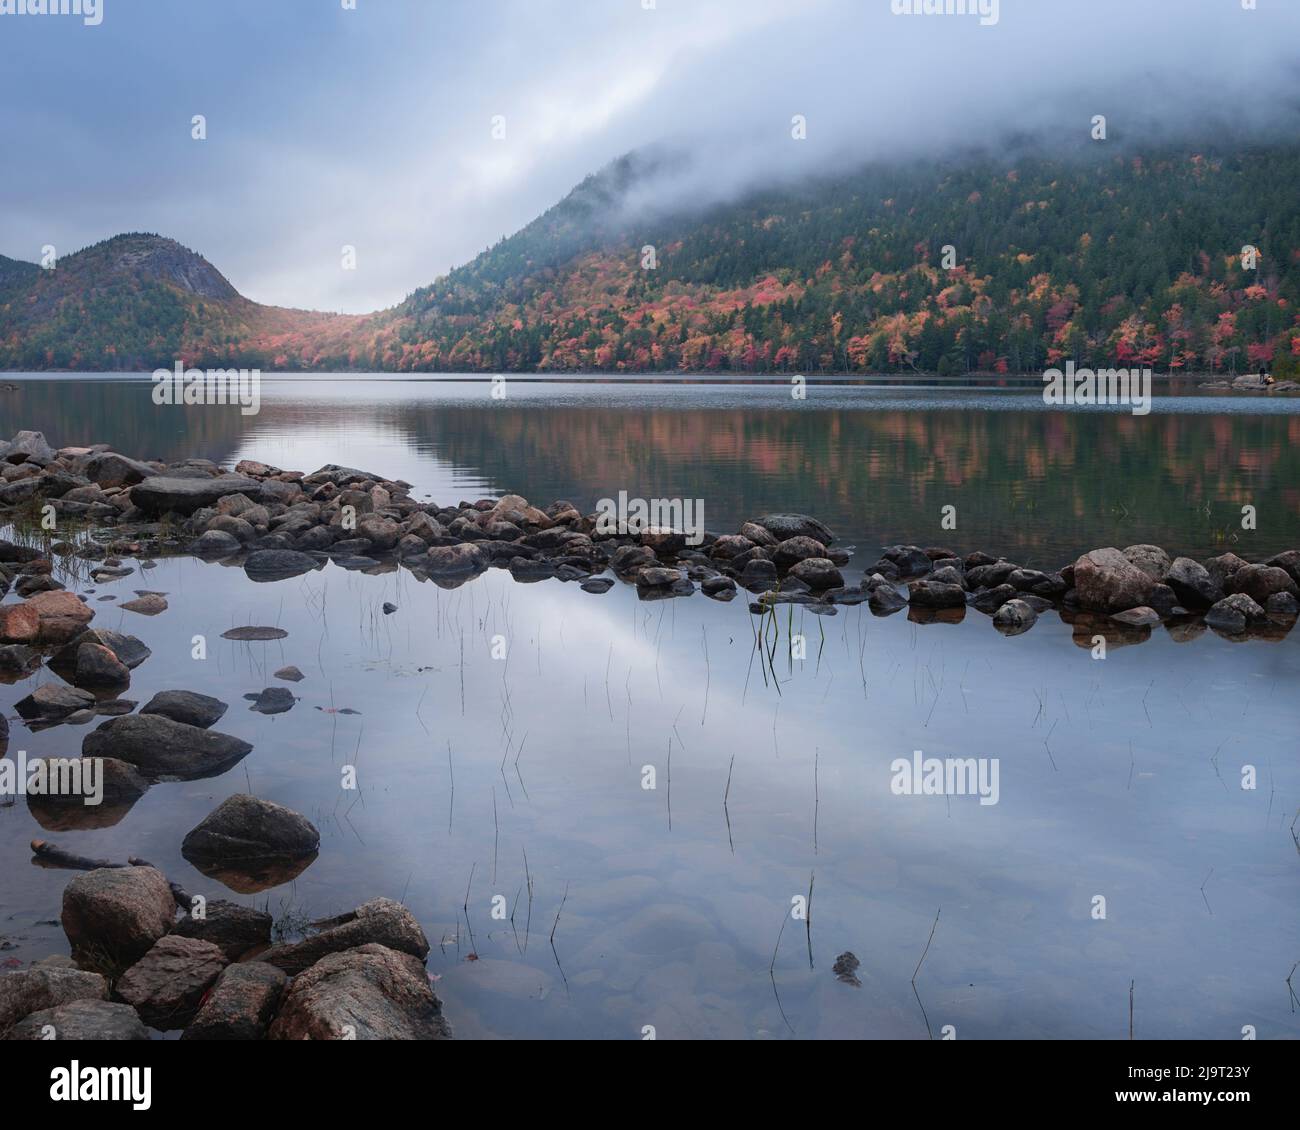 USA, Maine, Acadia National Park. Mountain and forest reflections in lake. Stock Photo